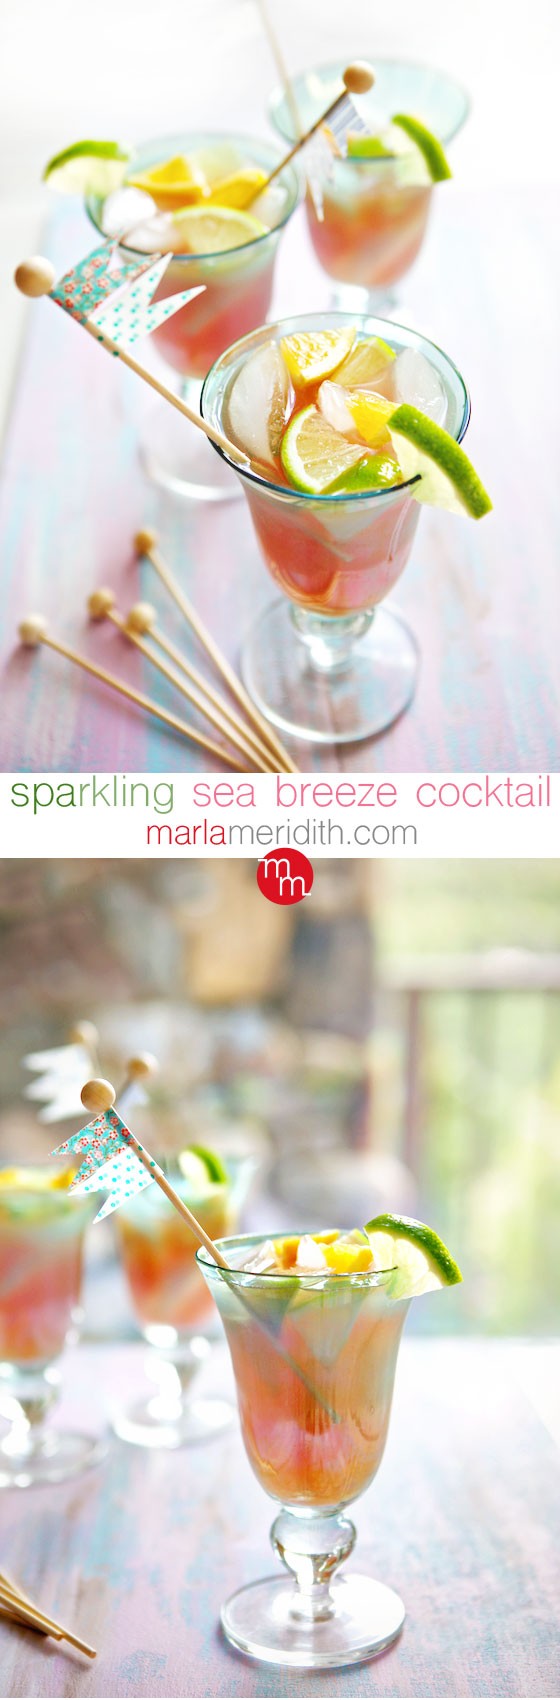 Sparkling Seabreeze Cocktail | MarlaMeridith.com